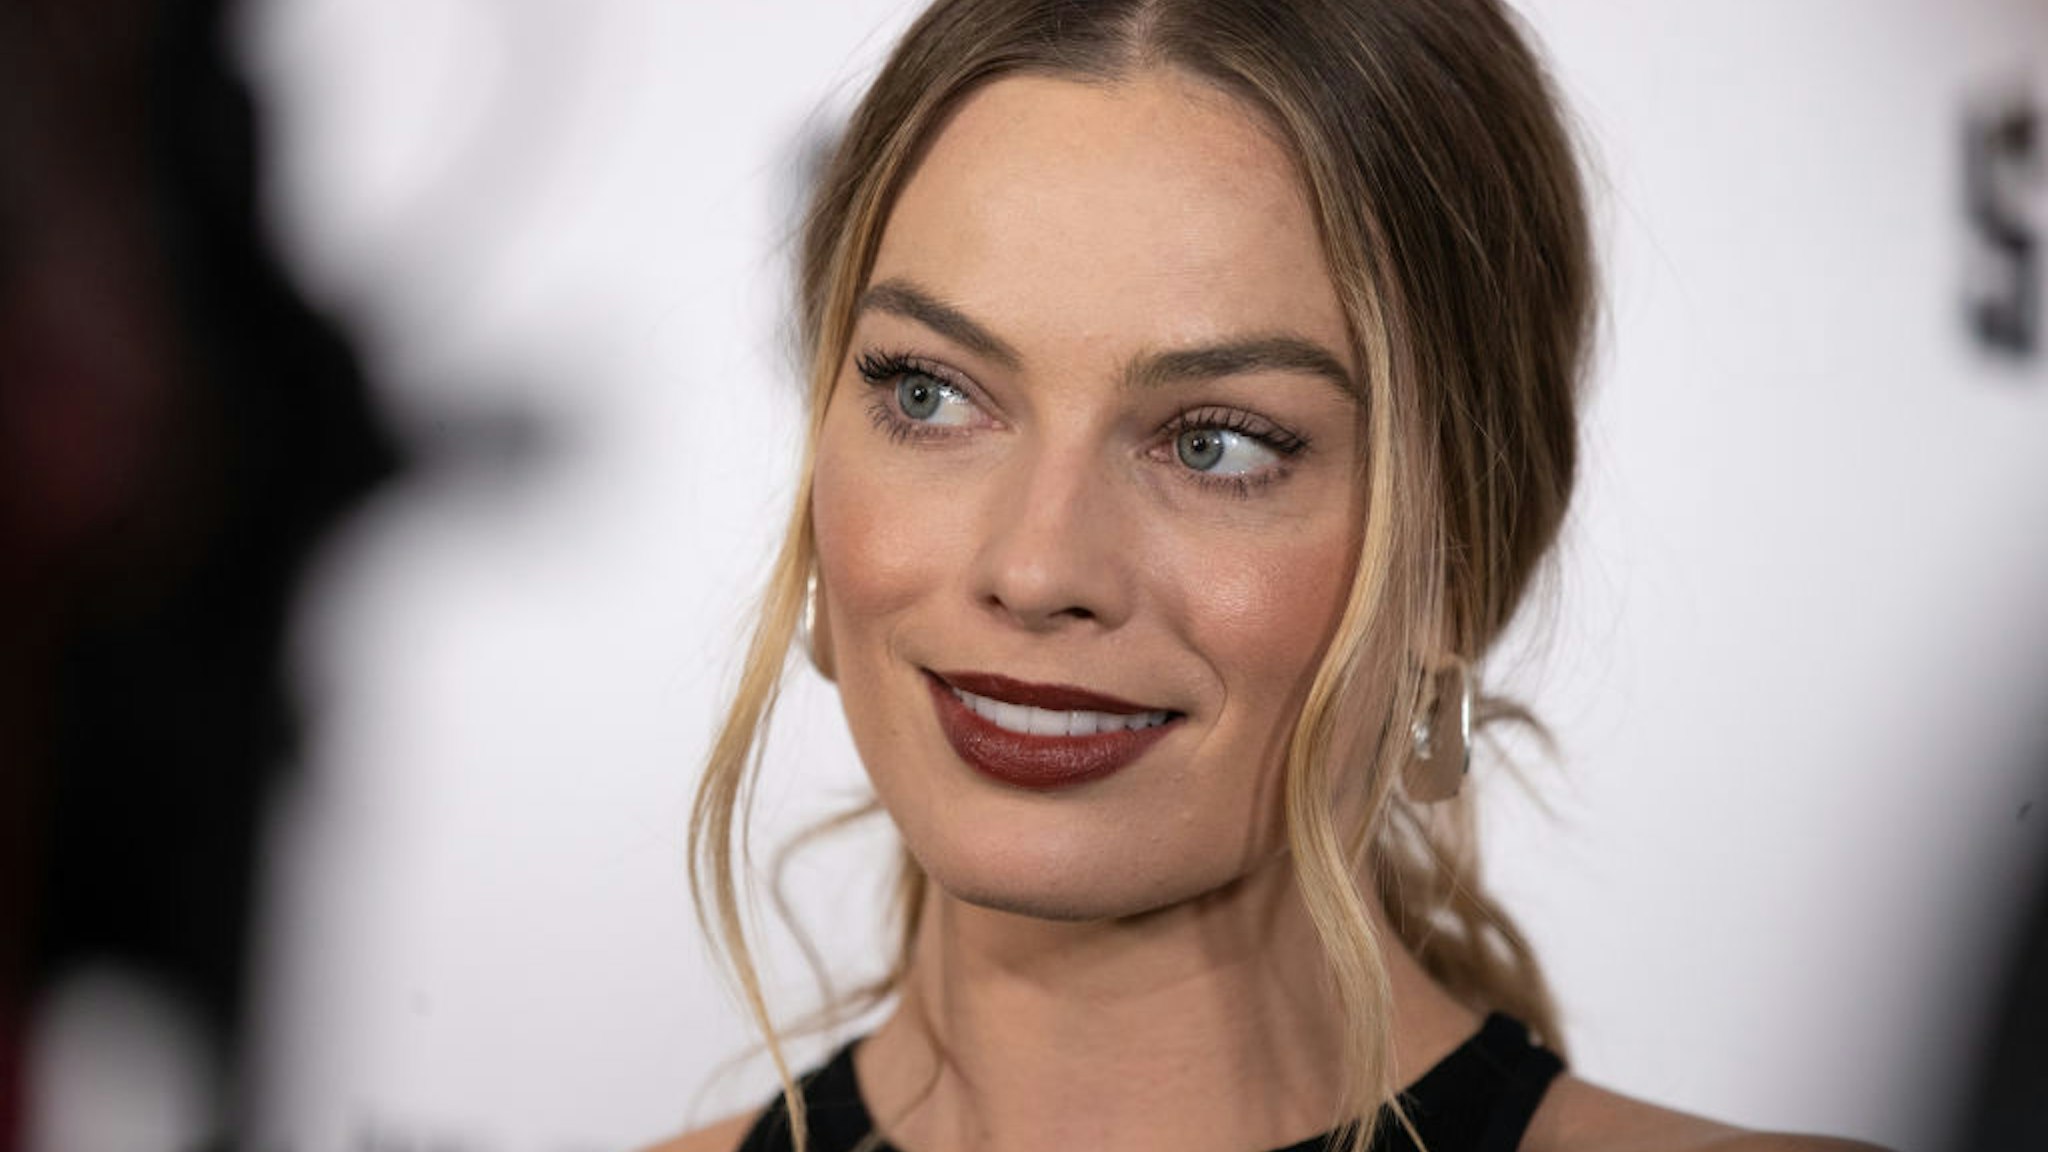 SAN FRANCISCO, CALIFORNIA - DECEMBER 05: Actress Margot Robbie gives an interview at SFFILM Awards Night at Yerba Buena Center for the Arts on December 05, 2022 in San Francisco, California. (Photo by Miikka Skaffari/Getty Images)